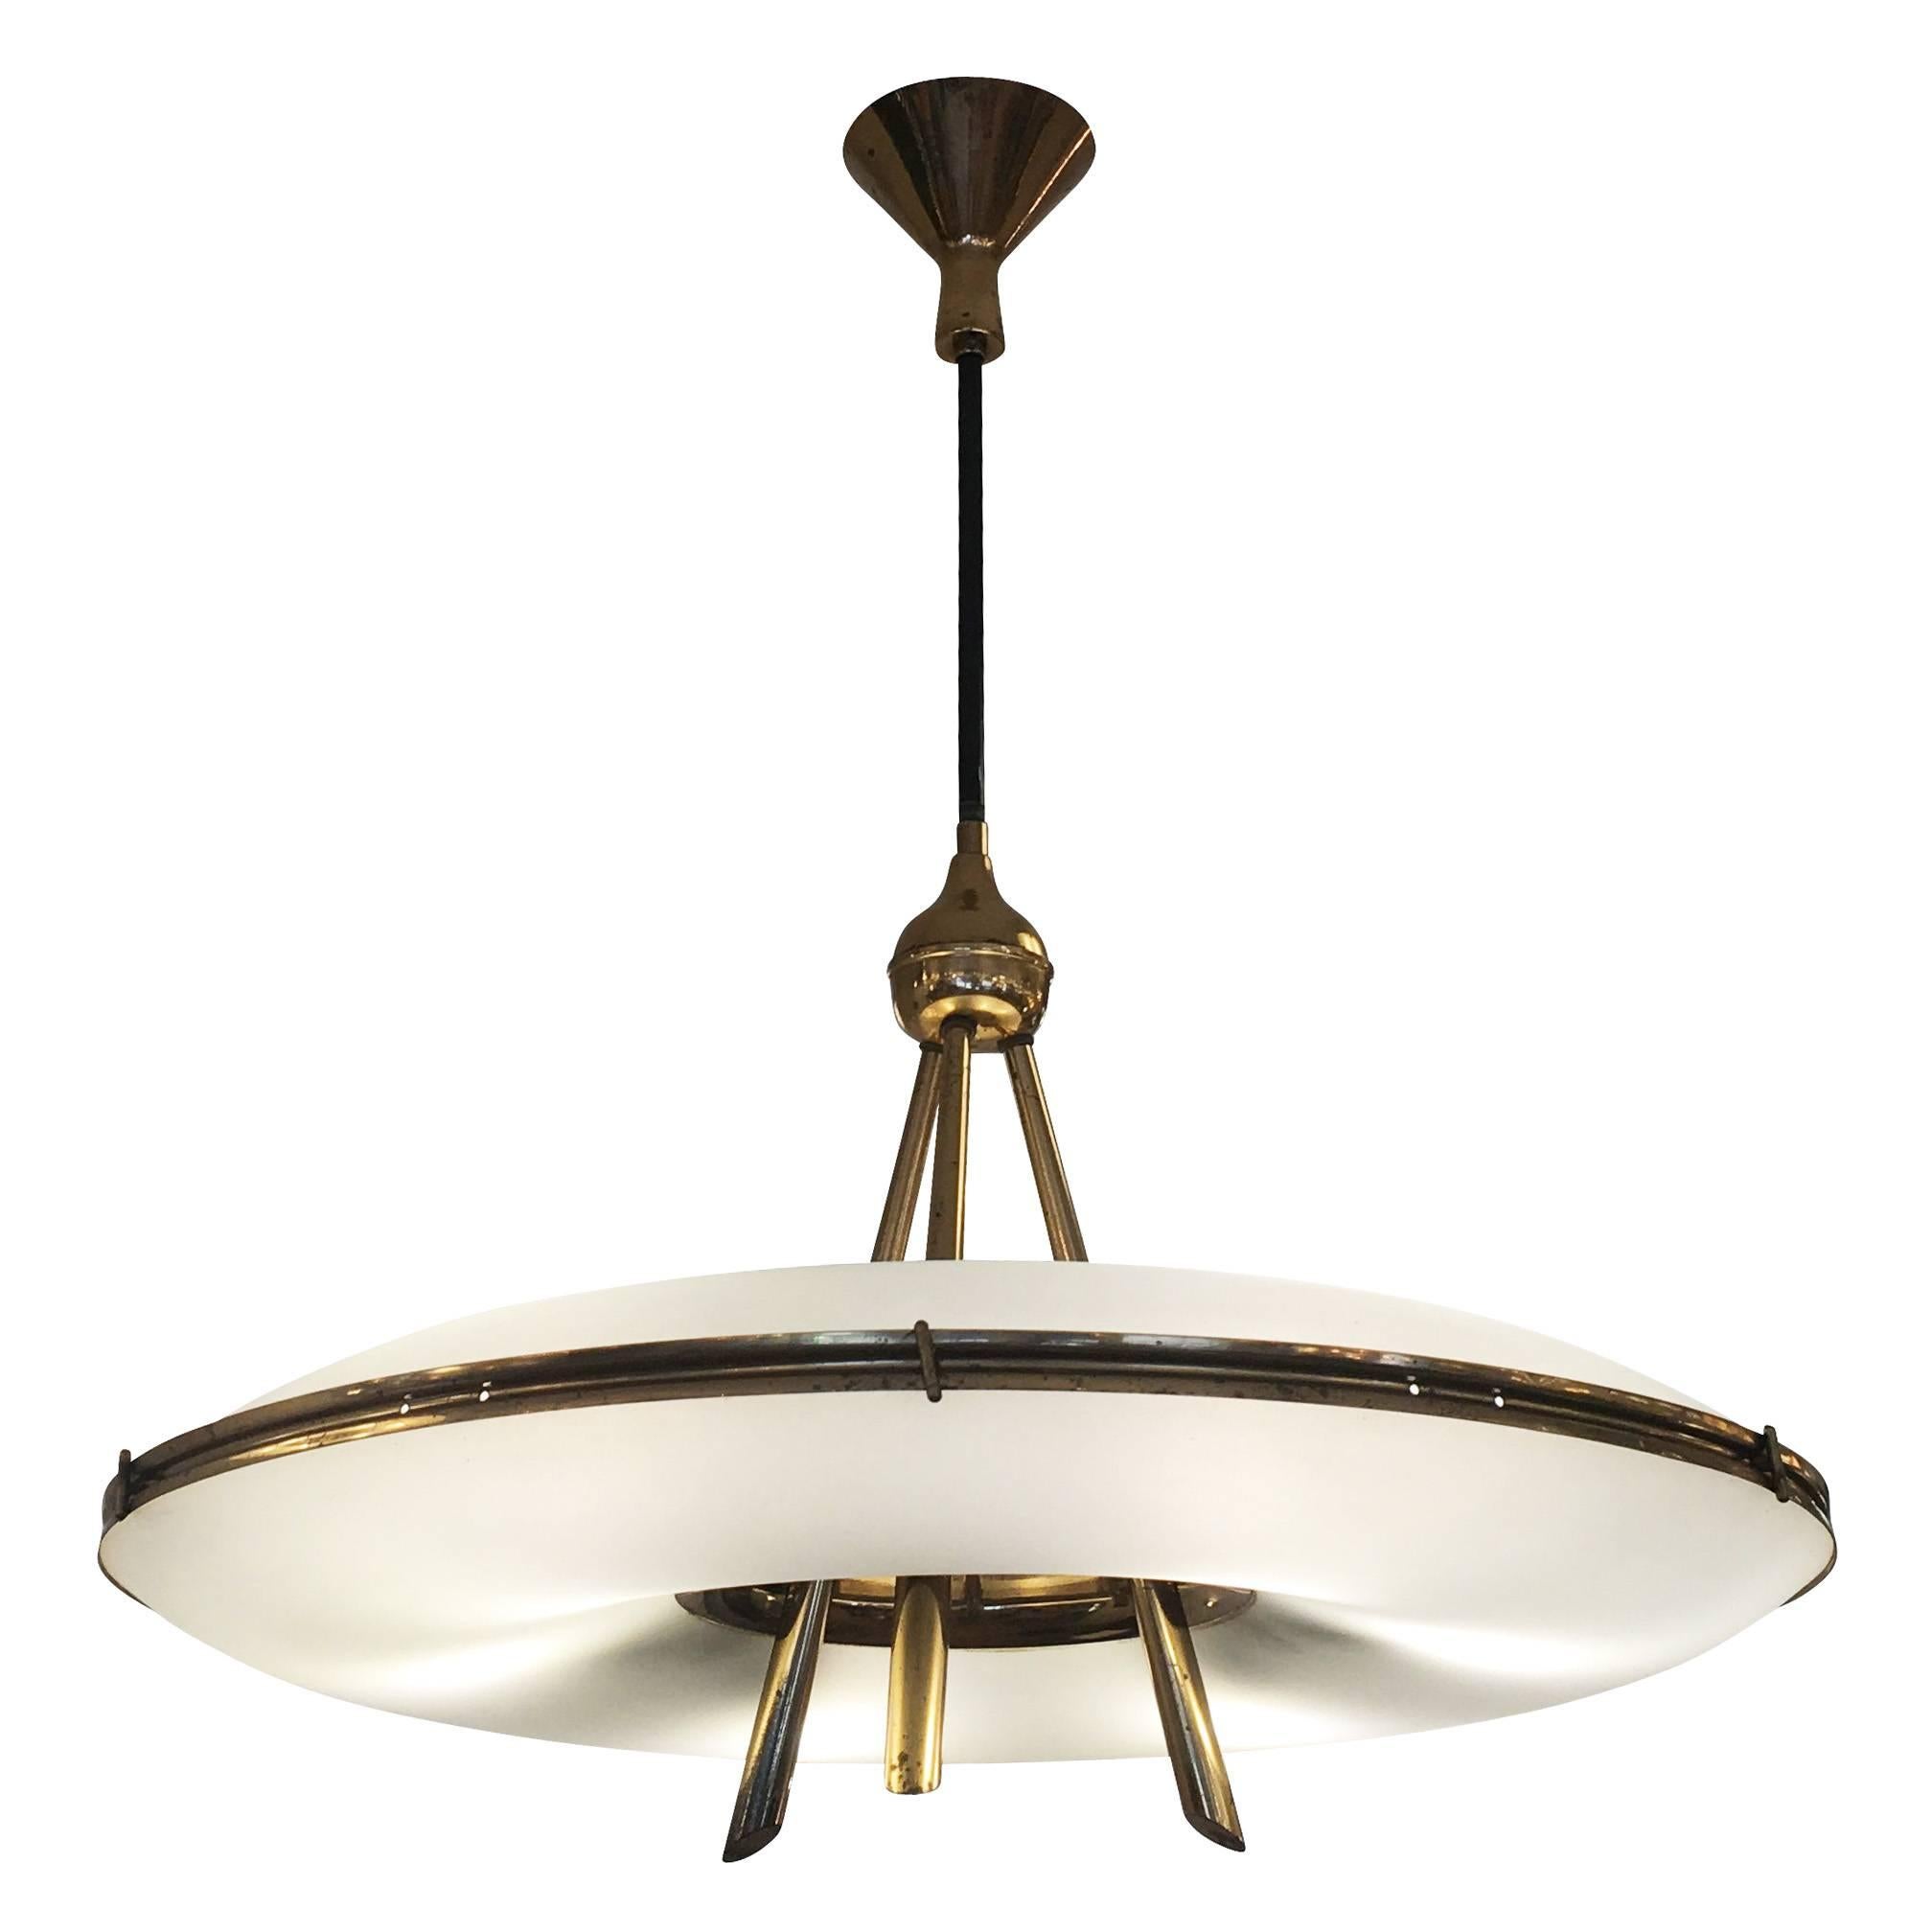 Saucer shaped chandelier in the style of Stilnovo with two frosted glass shades on a brass frame. The architectural and well thought out design is highlighted by the three stems that merge into one and the contoured canopy. Holds six candelabra